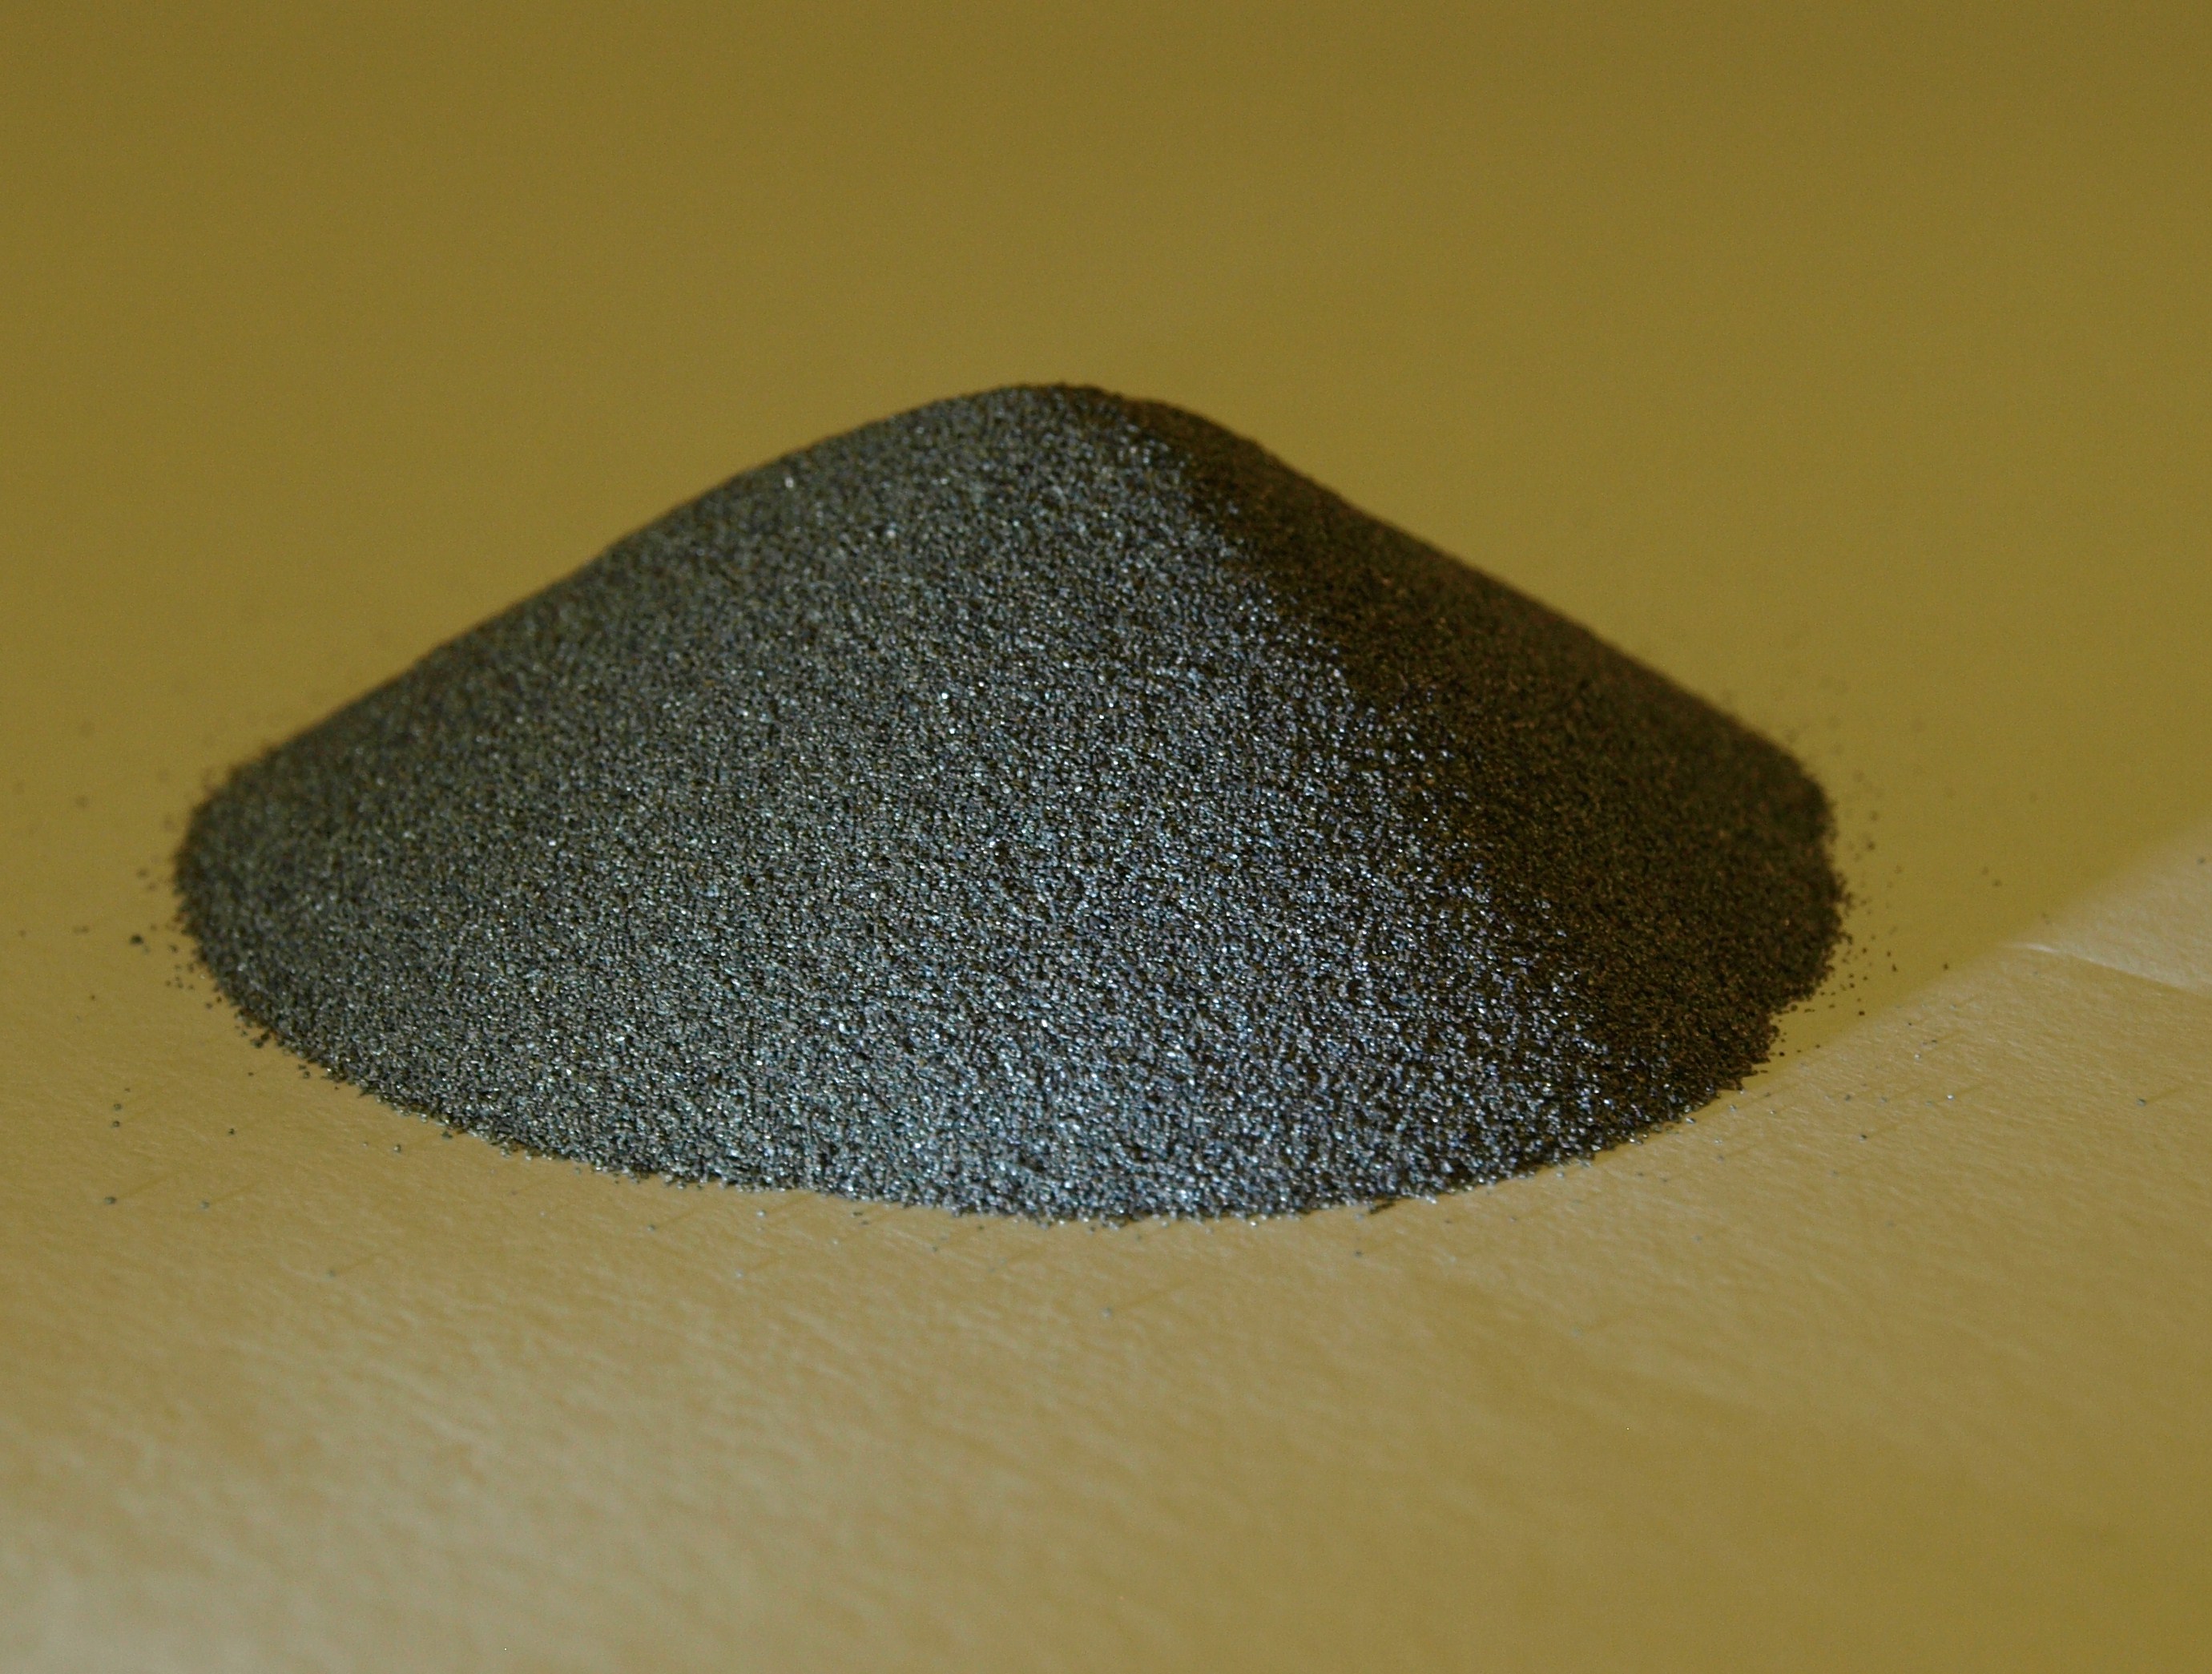 Metalysis’ technology transforms ores directly into metal powders using electrolysis in a single step.